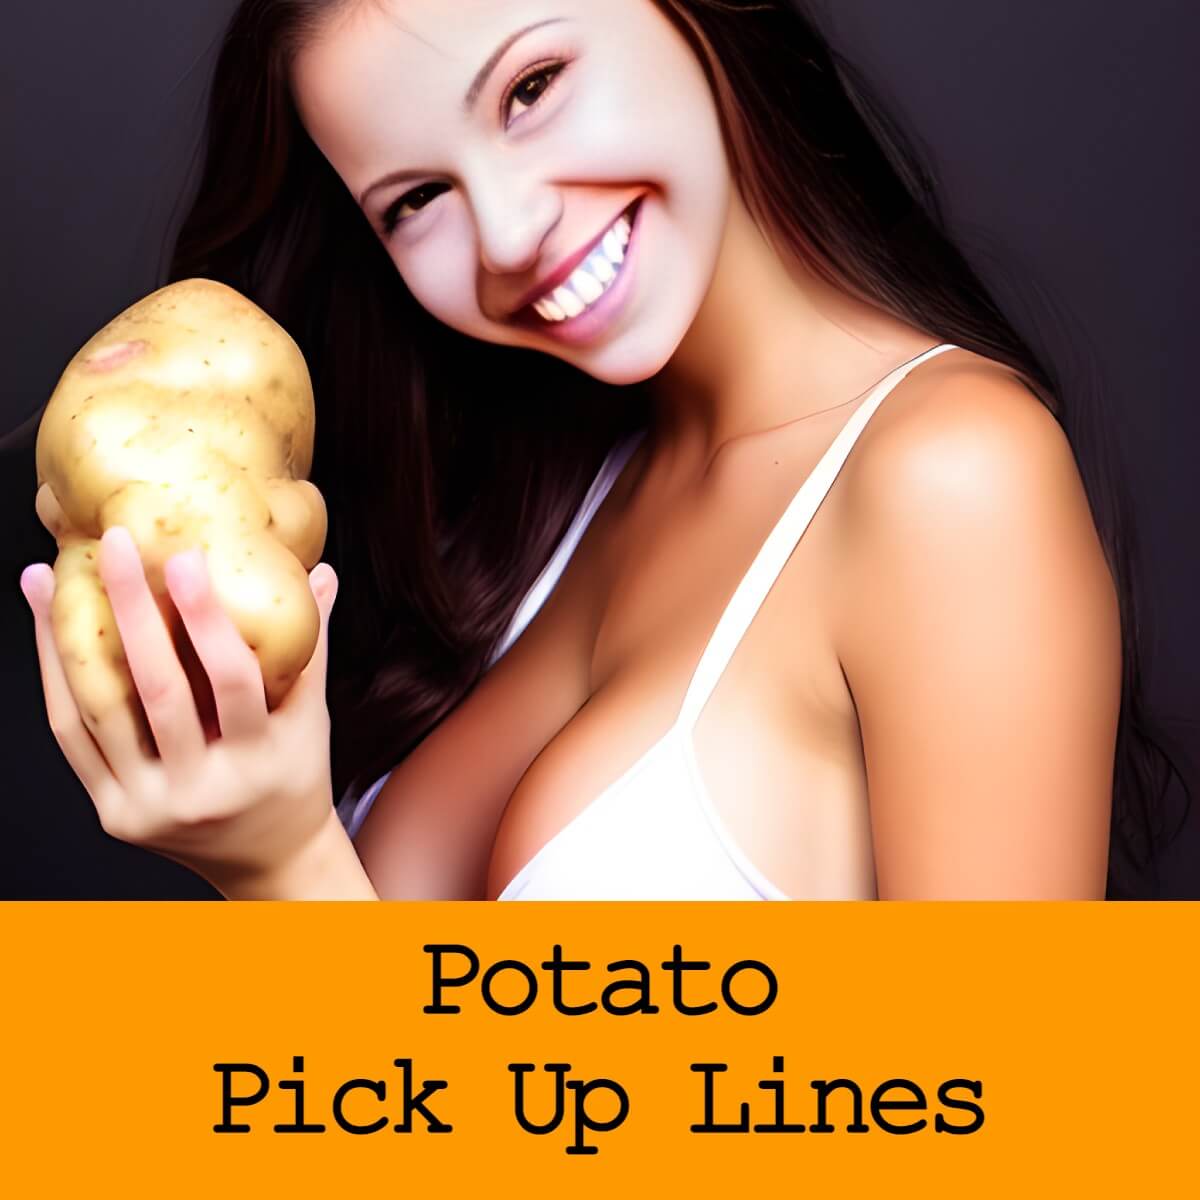 Pick Up Lines About Potatoes